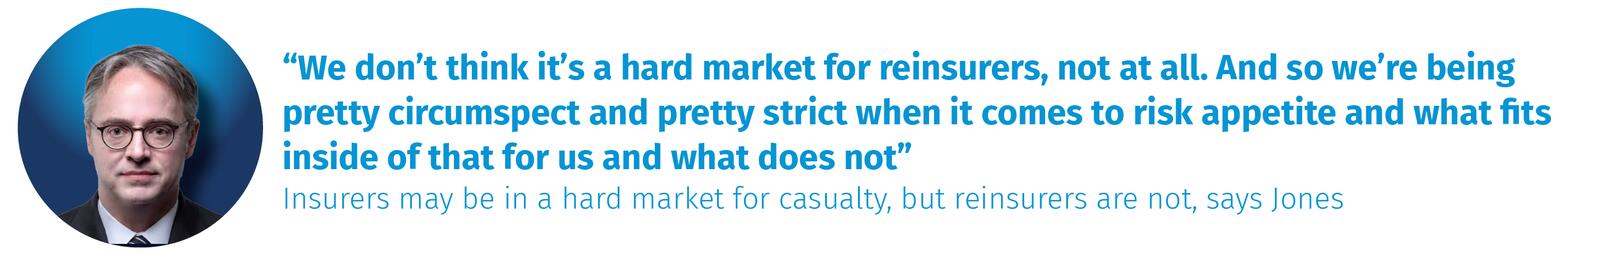 Insurers may be in a hard market for casualty, but reinsurers are not, says Jones